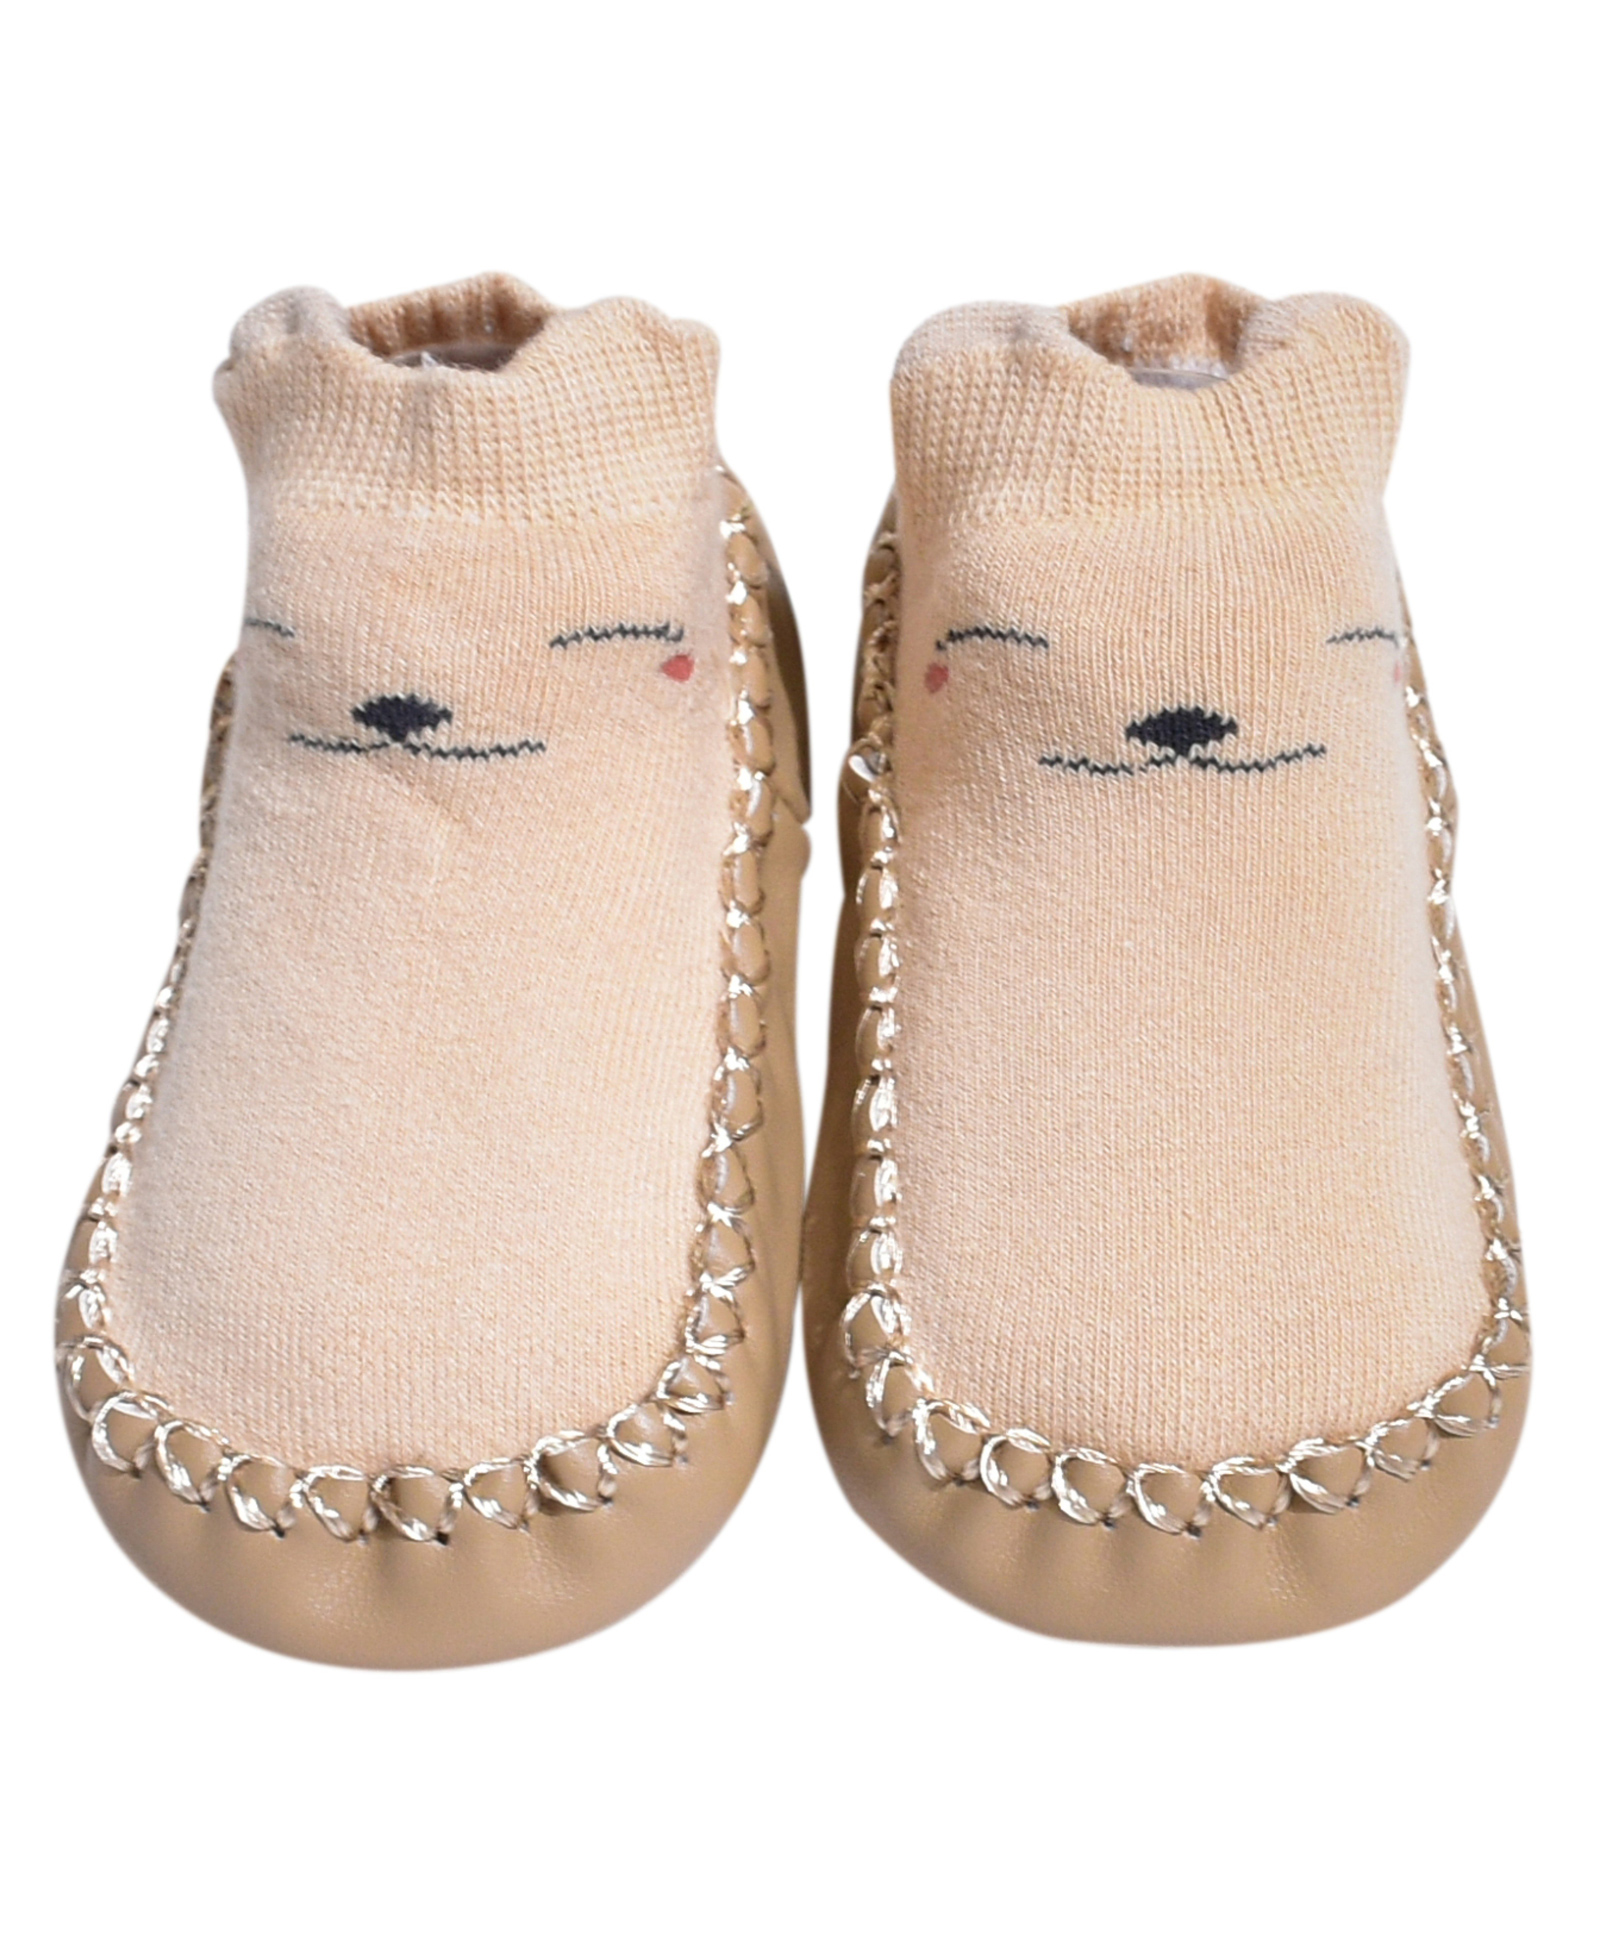 Buy Kidofash Cartoon Face Design Socks Cum Booties - Brown for Both (12-18  Months) Online in India, Shop at  - 12395344